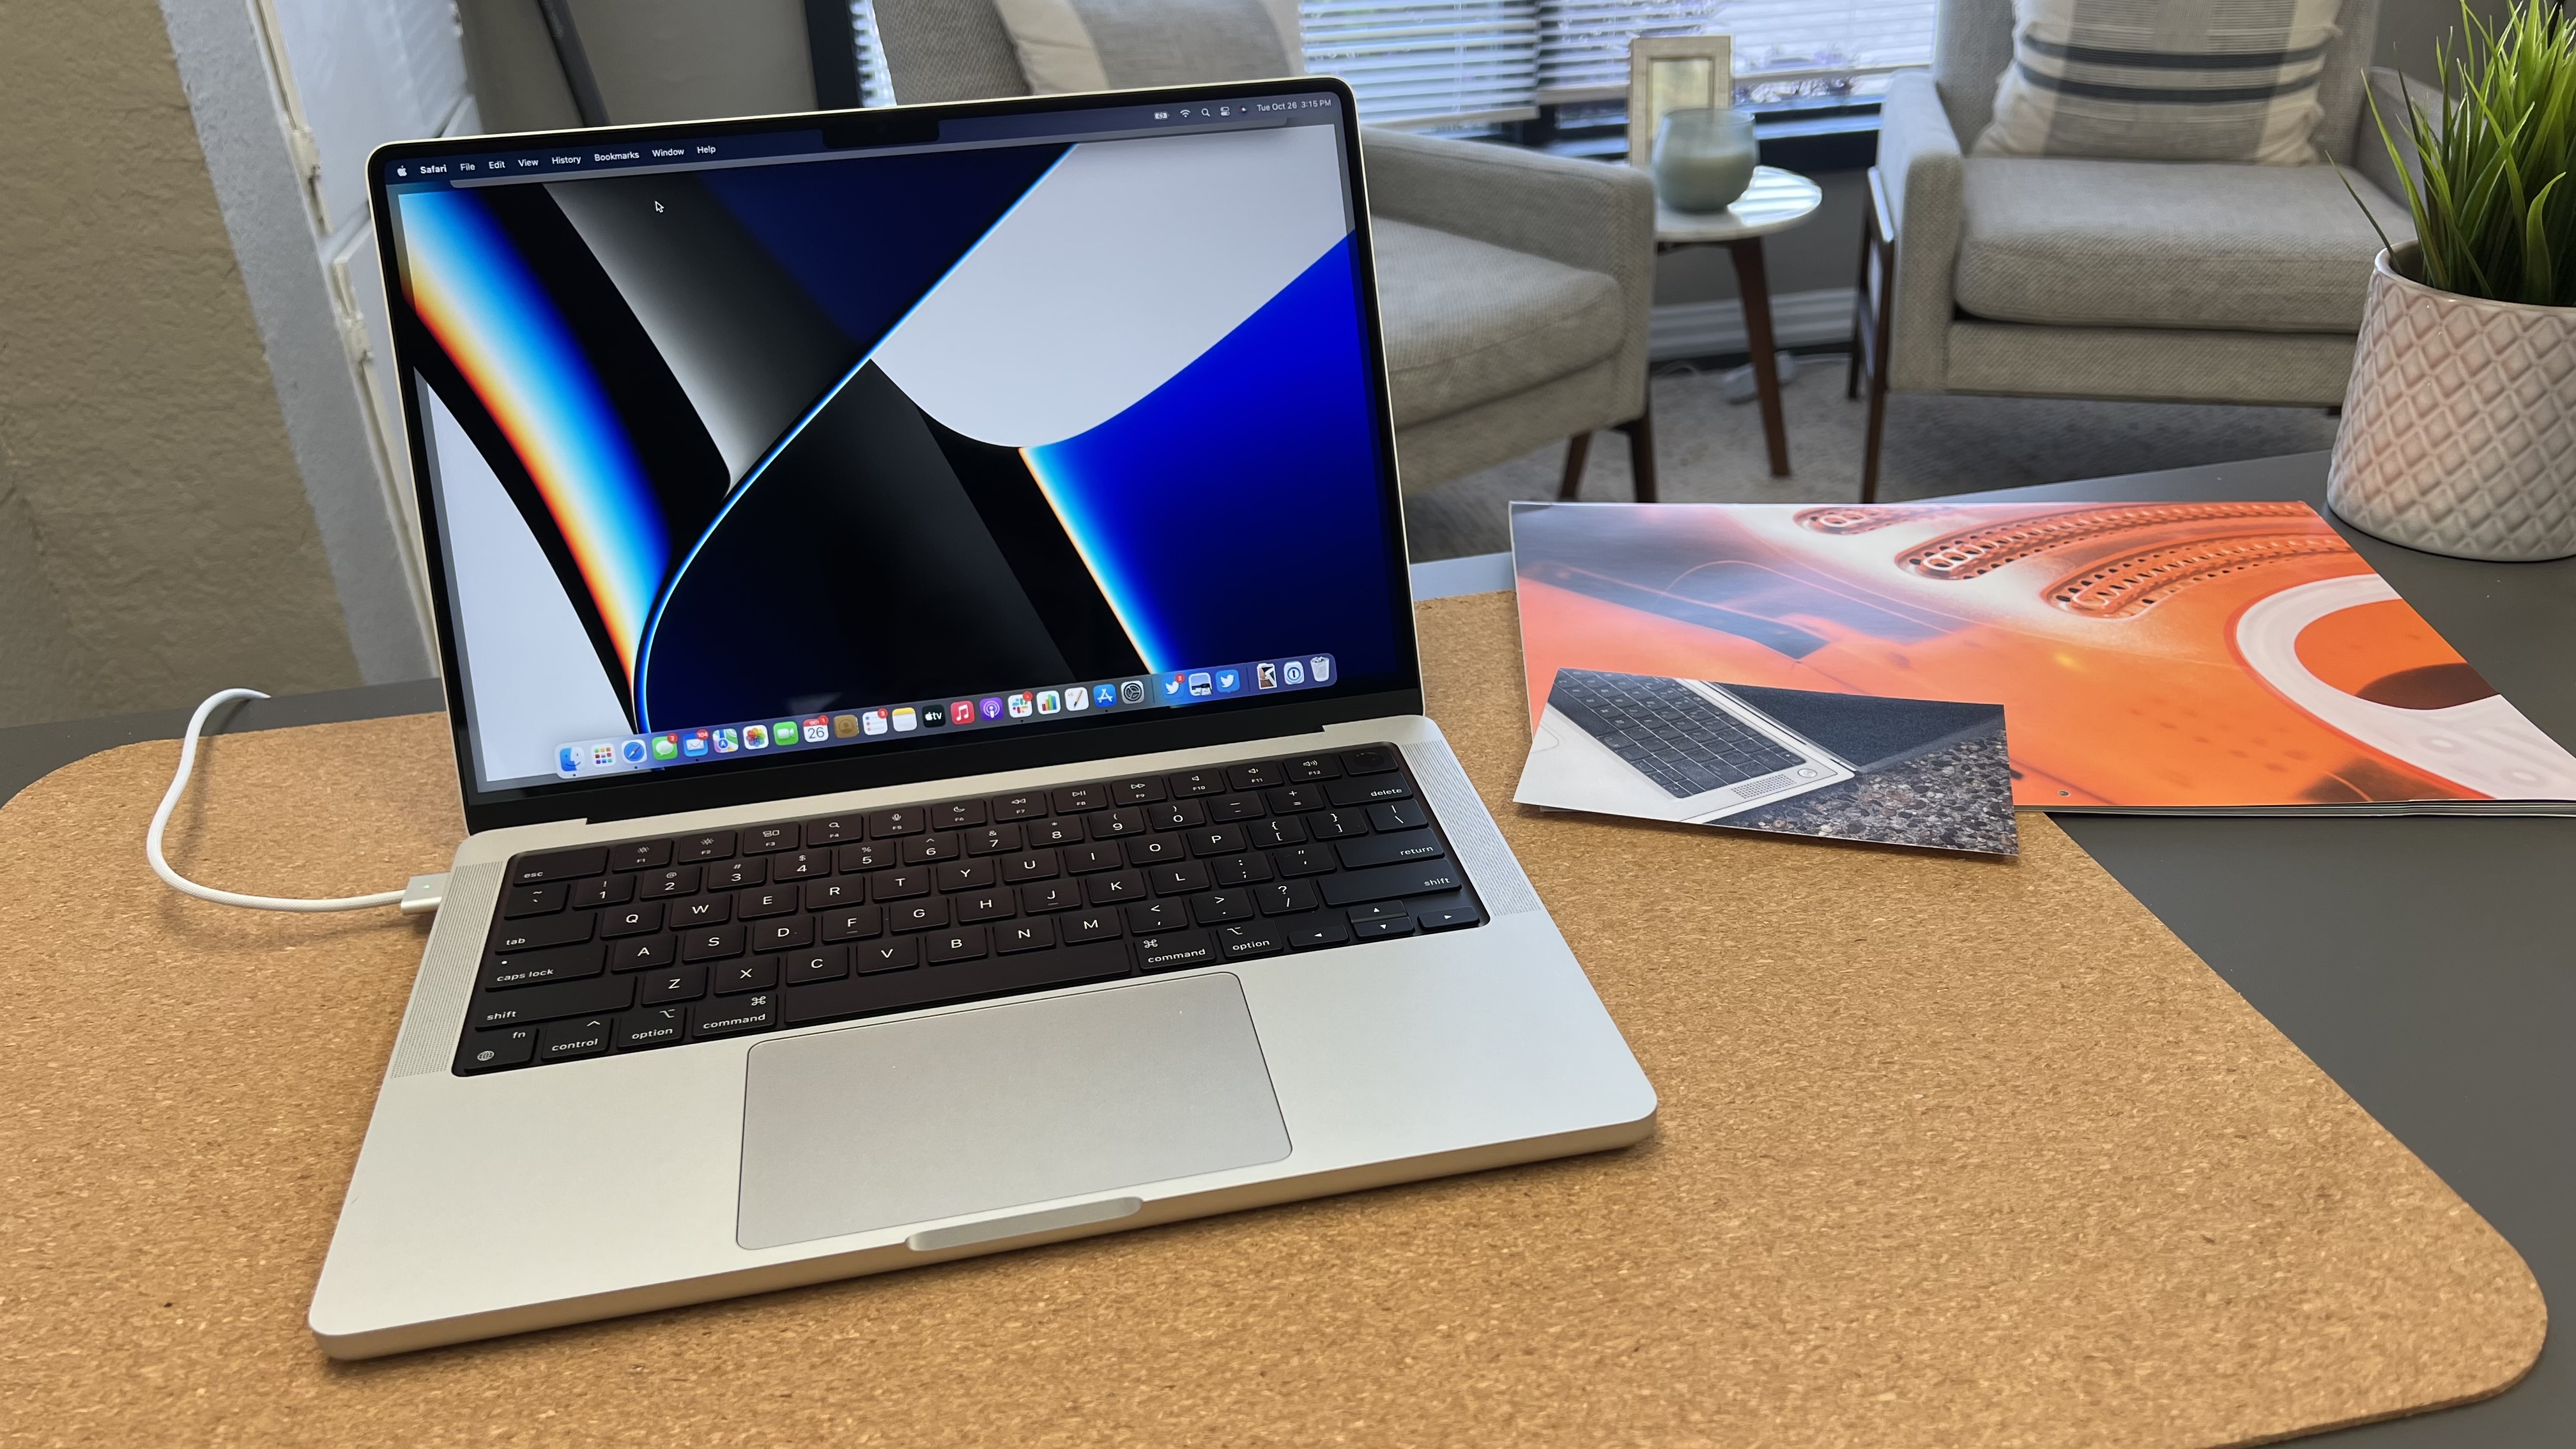 Hands-on: The new 14-inch MacBook Pro is a stunning return to form